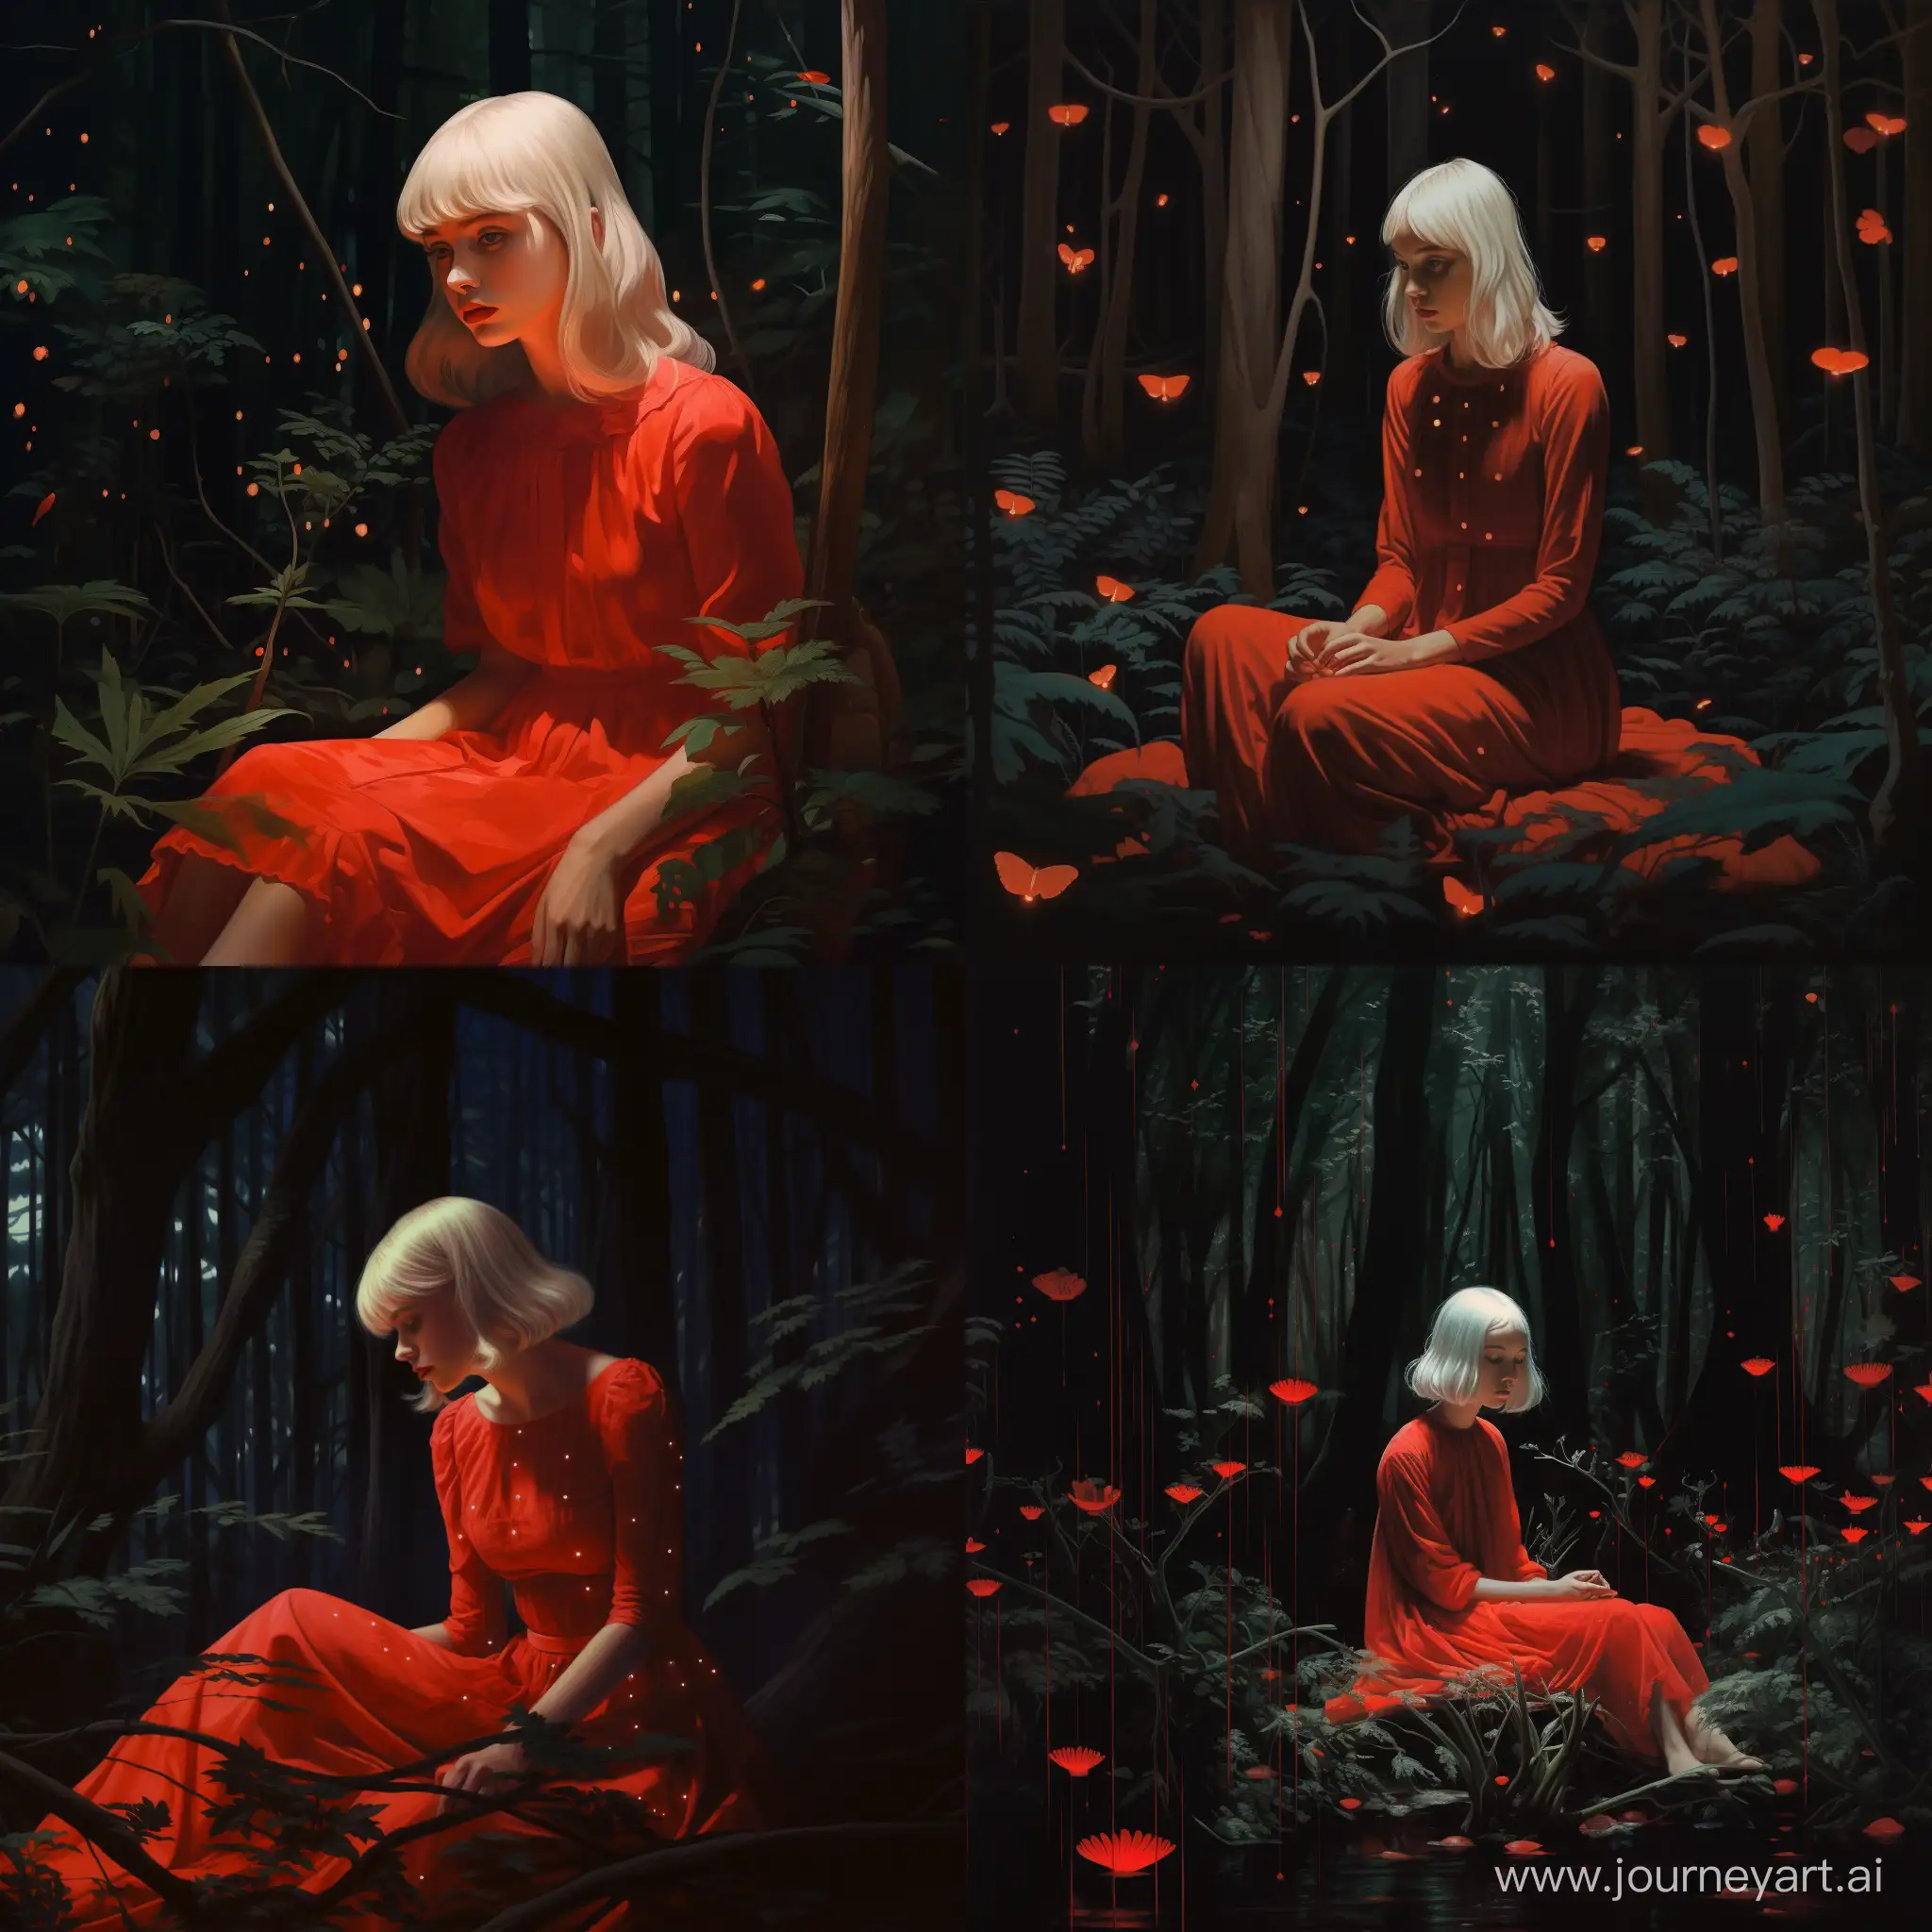 Enchanting-Forest-Scene-with-a-WhiteHaired-Girl-in-a-Lush-Red-Dress